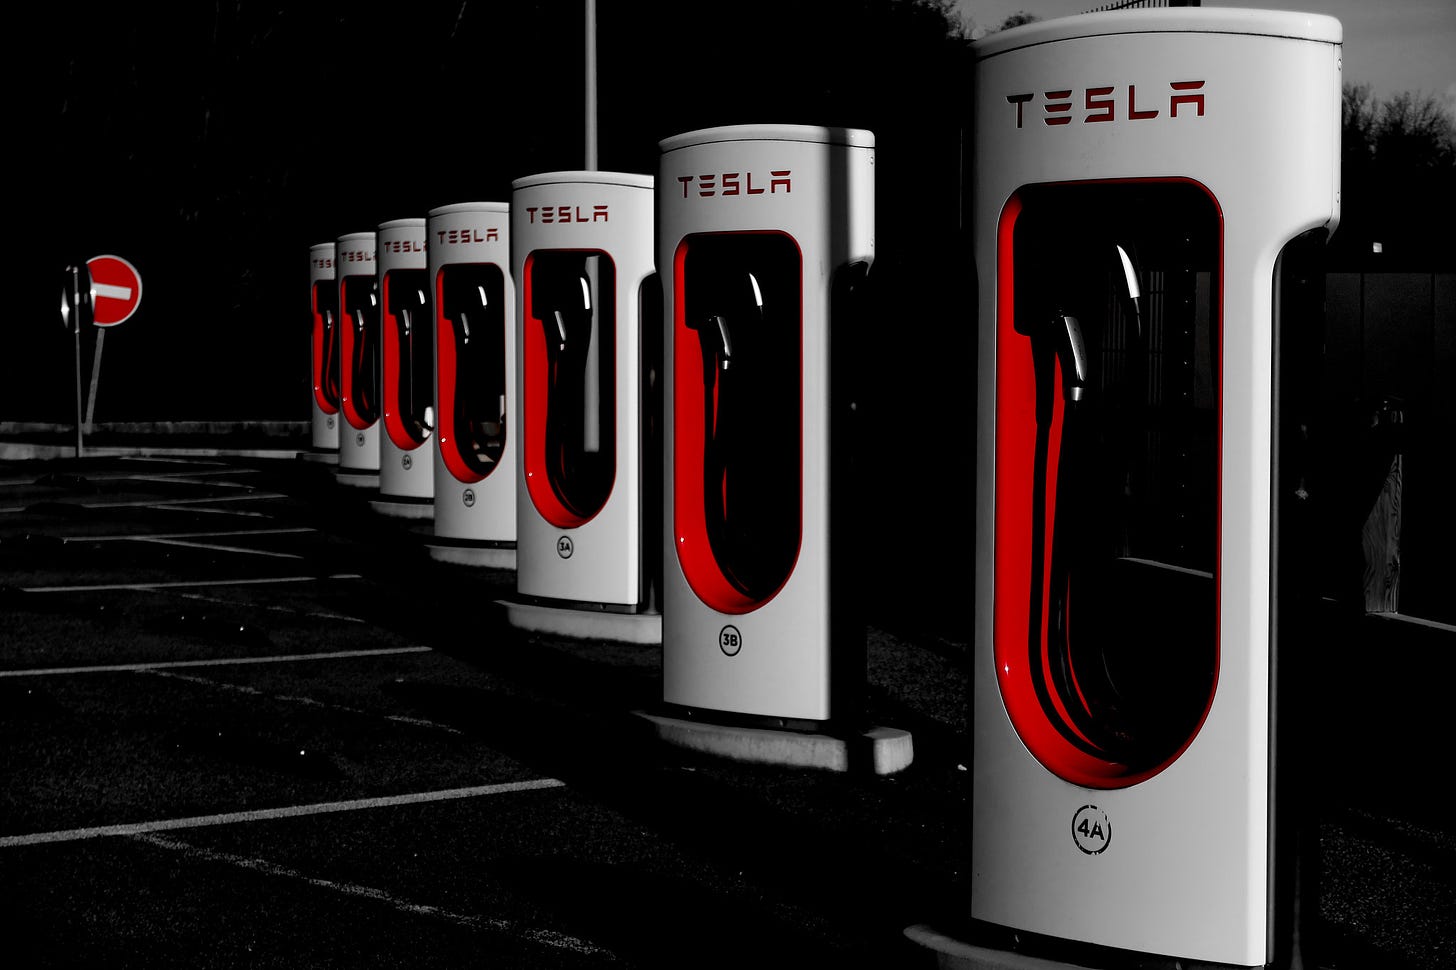 Tesla Superchargers by Roger Simon via Flickr